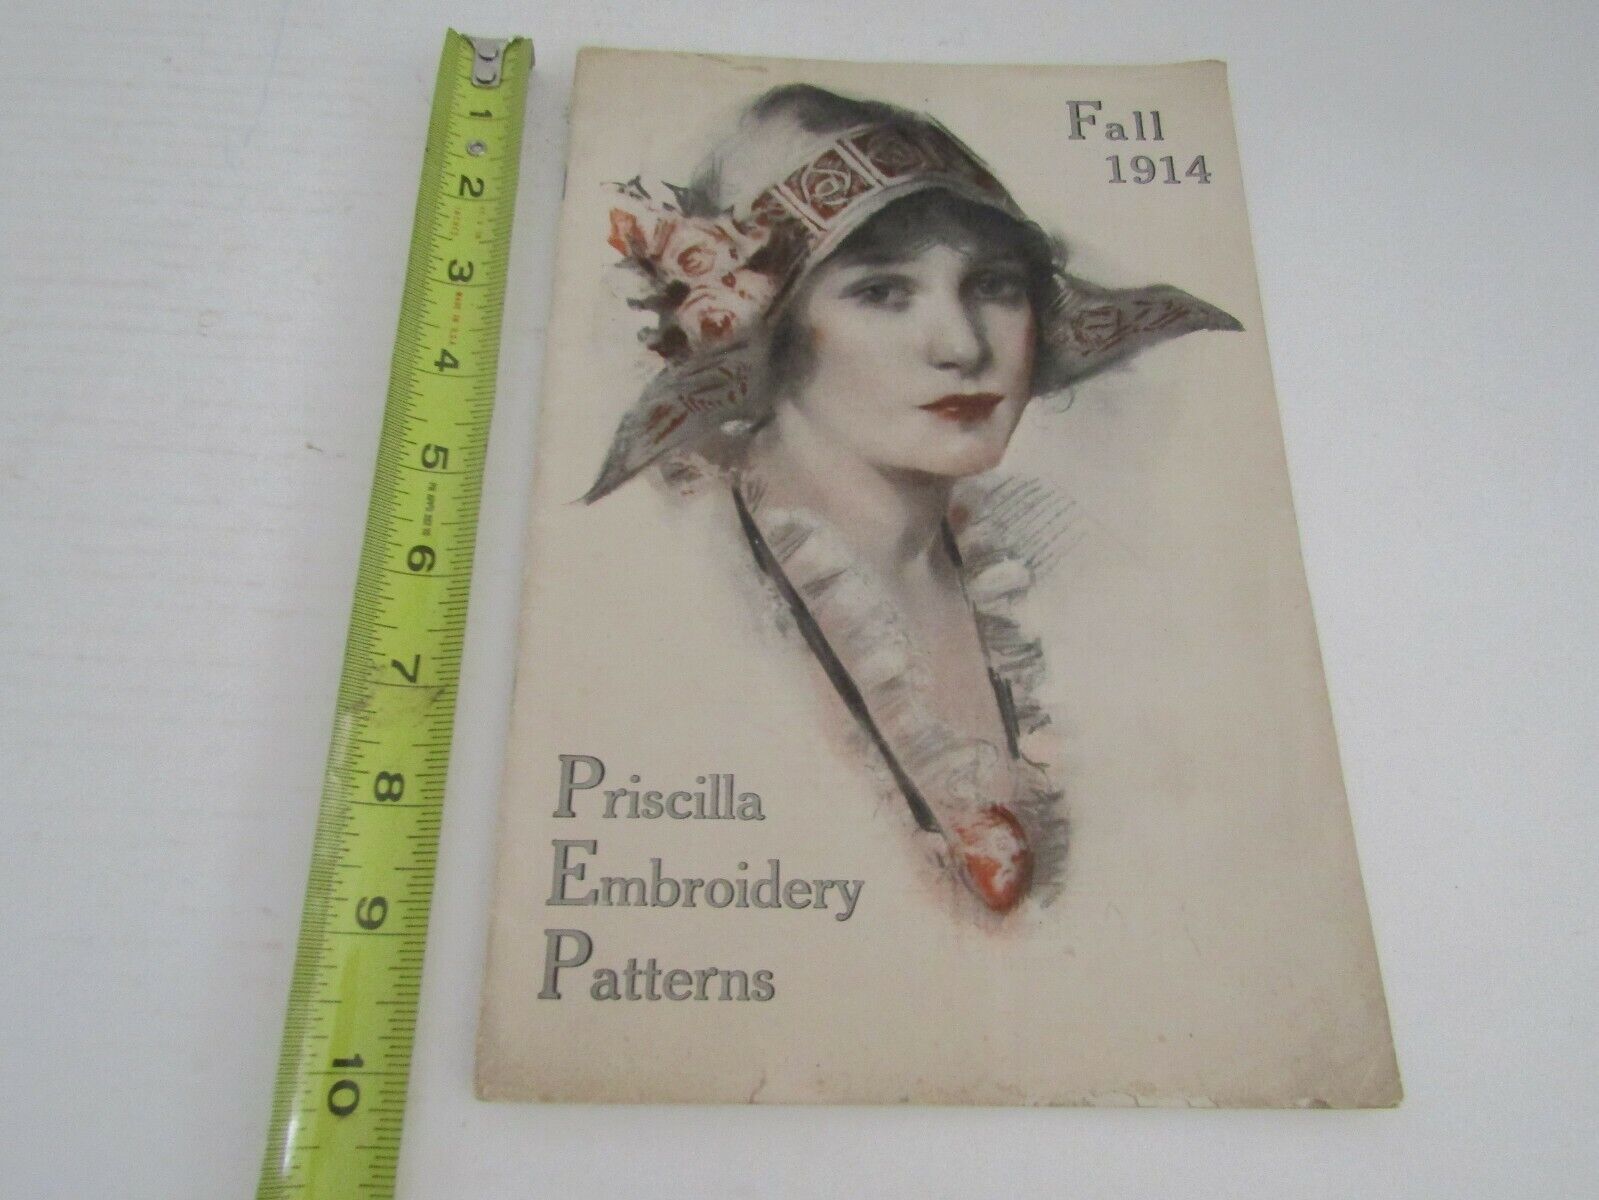 ANTIQUE SEWING 1914 PRISCILLA EMBROIDERY PATTERNS BOOK BOOKLET ADVERTISING SEW